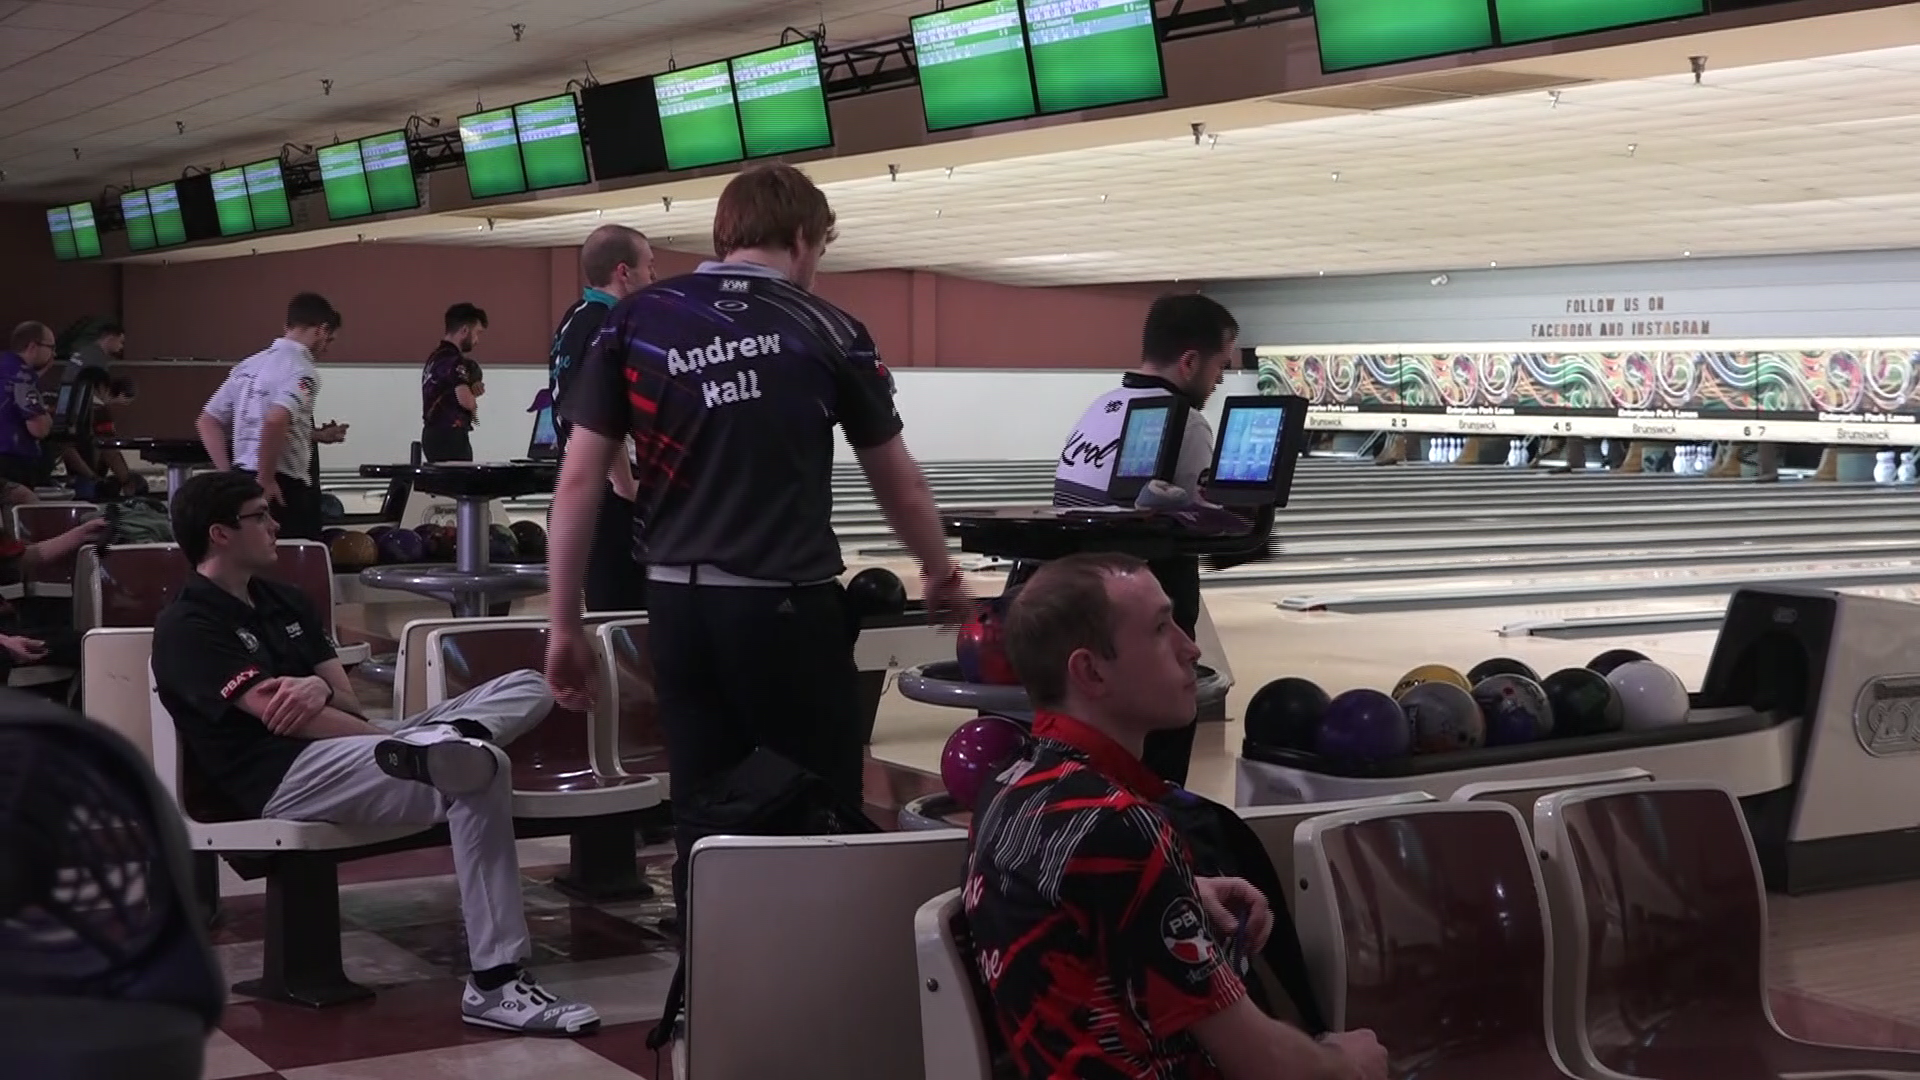 Professional Bowlers compete in the Springfield Classic for a national title